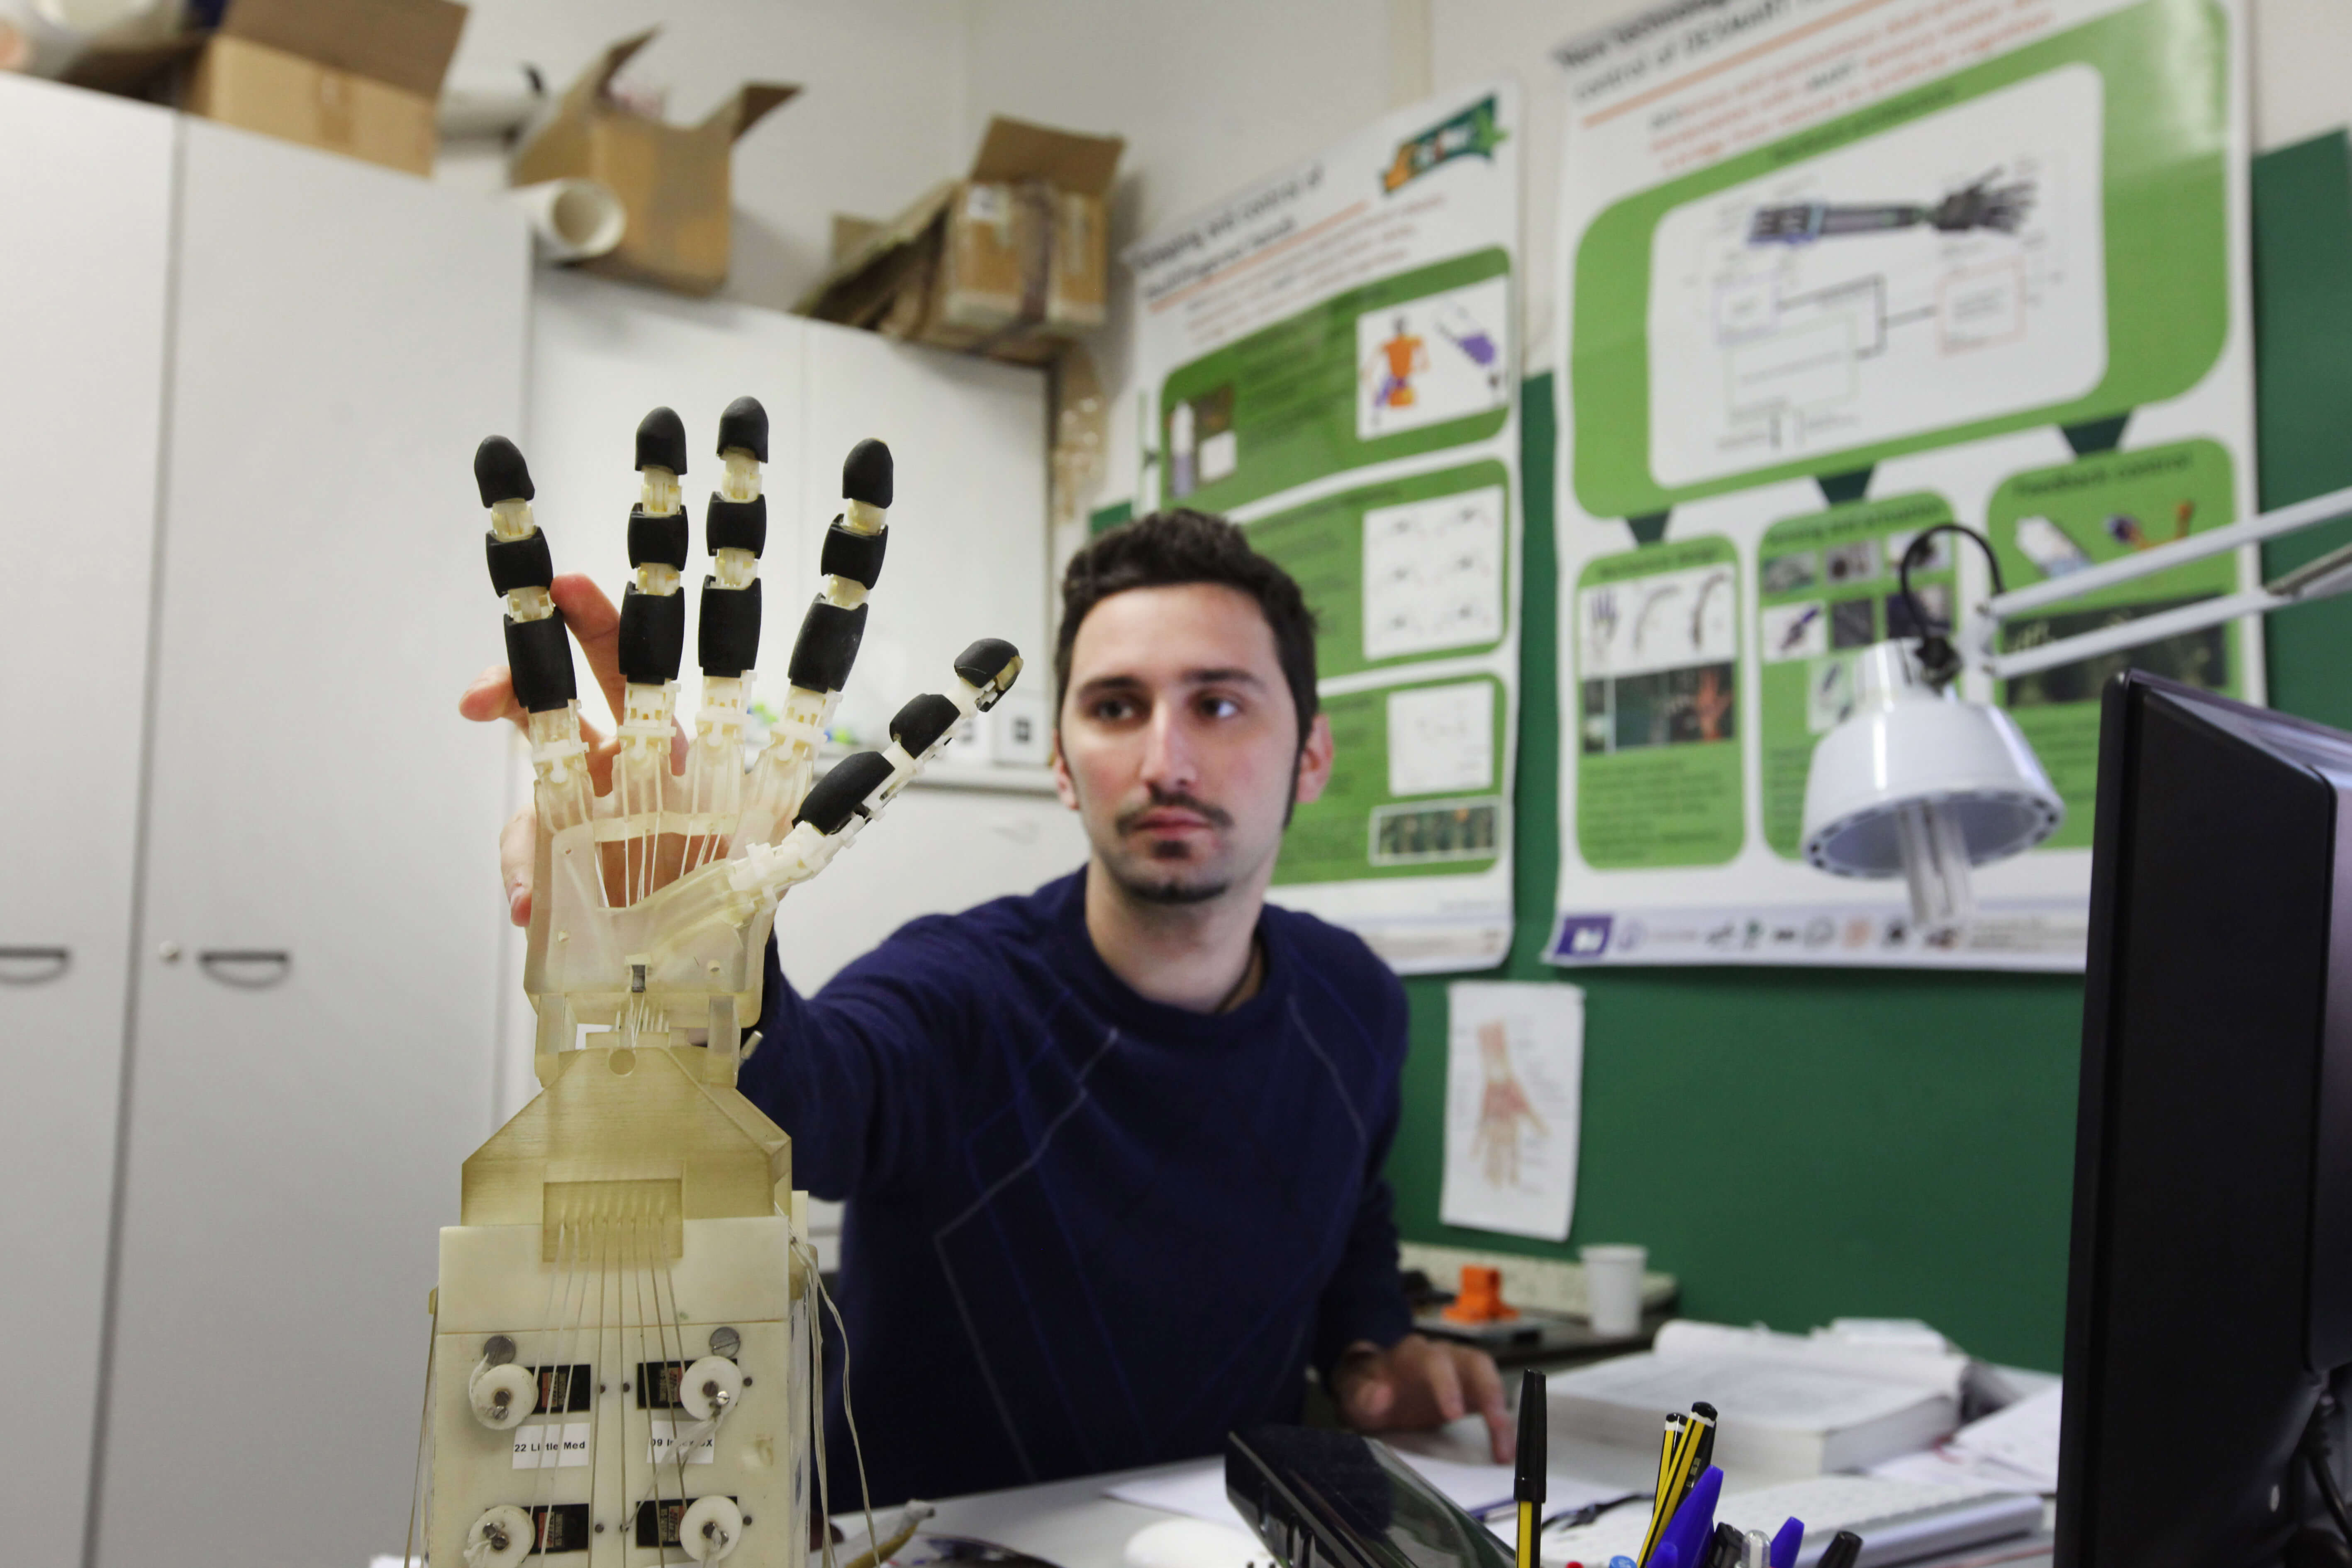 University of Bologna: Postgraduate engineering degrees that future-proof your career